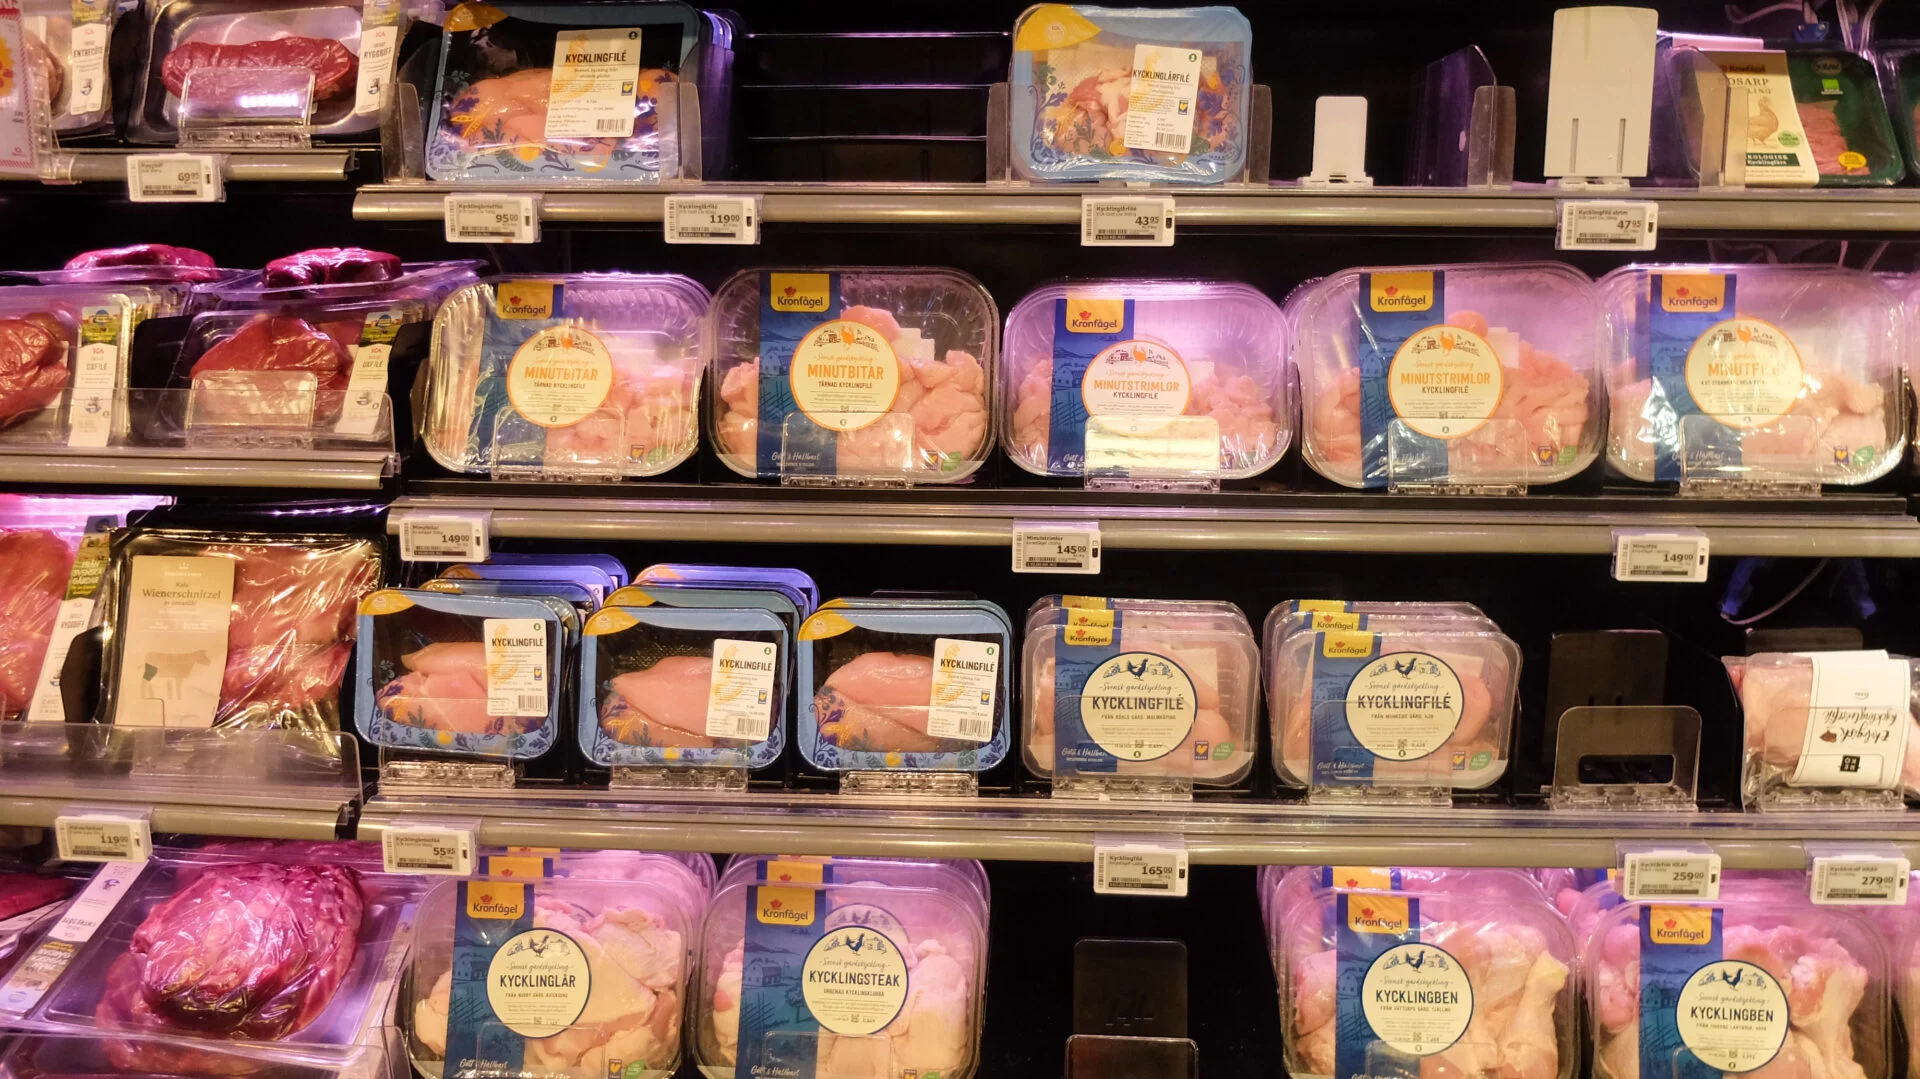 Chicken with plastic wrap found in a grocery store